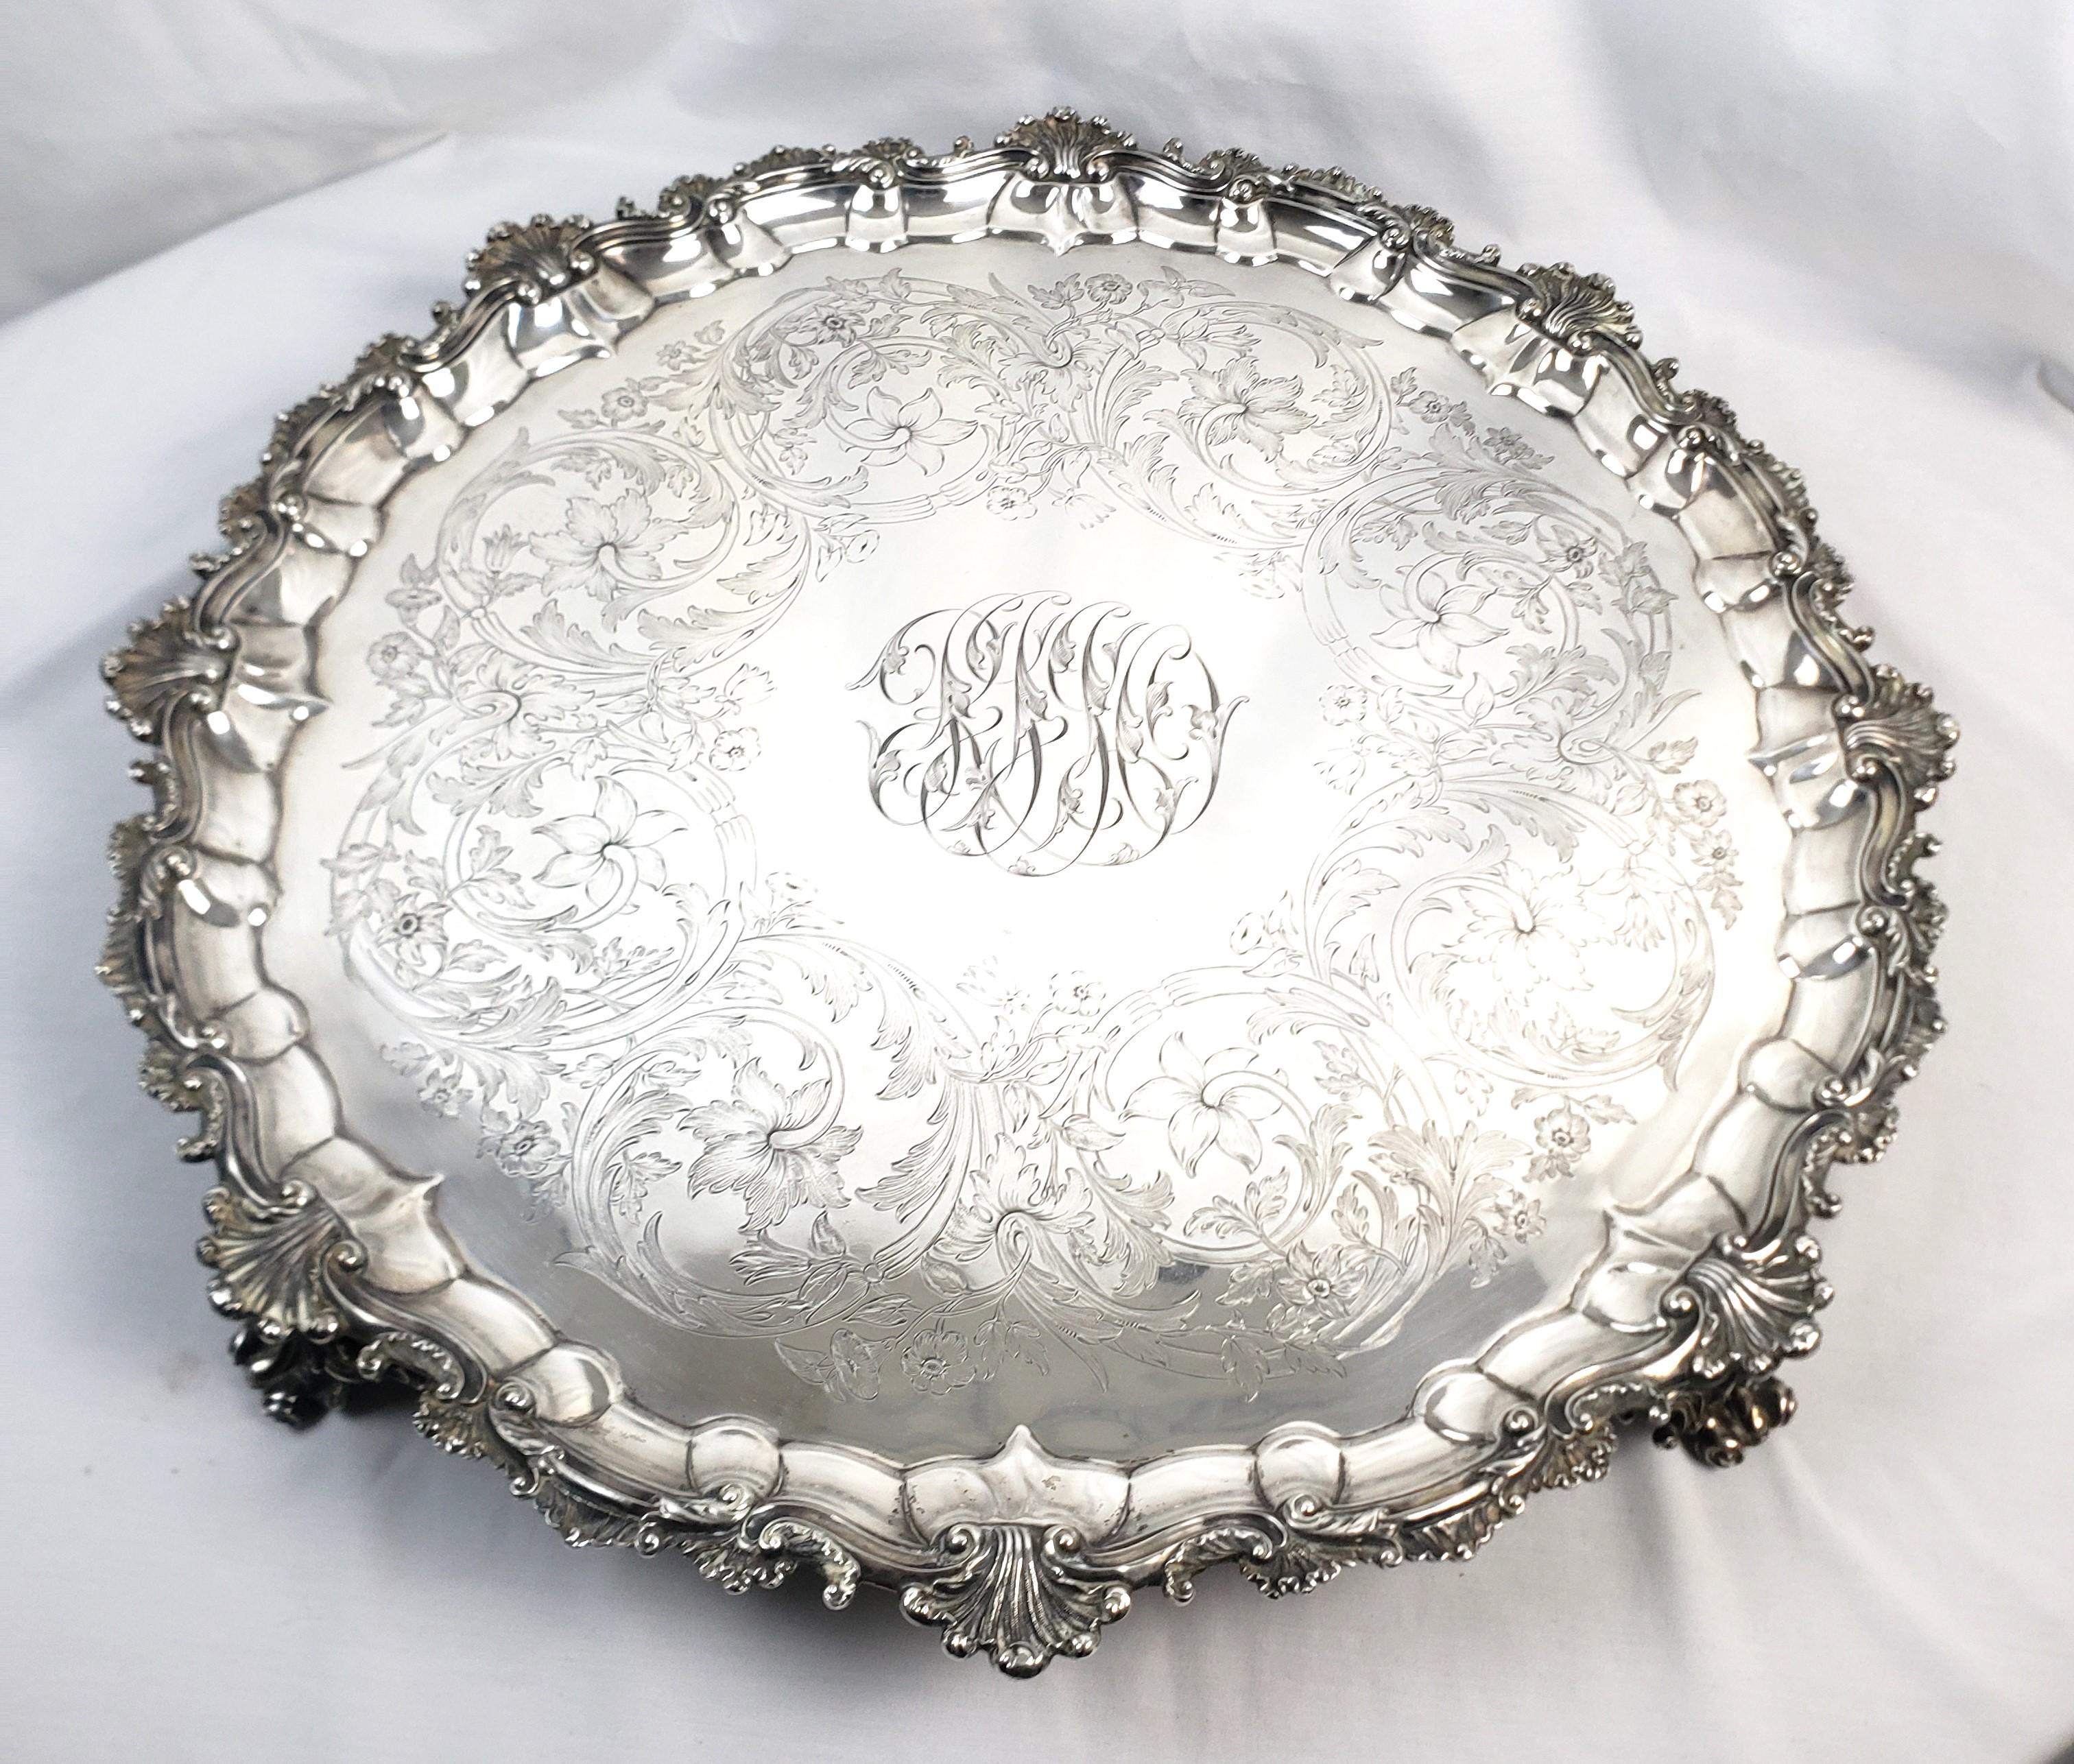 This enormous and very substantial antique salver or footed tray was made by Hunt, Roskell, Tate, Storr and Mortimer of England and dates to 1865 and done in the period Victorian style. This significant antique salver is composed of solid sterling